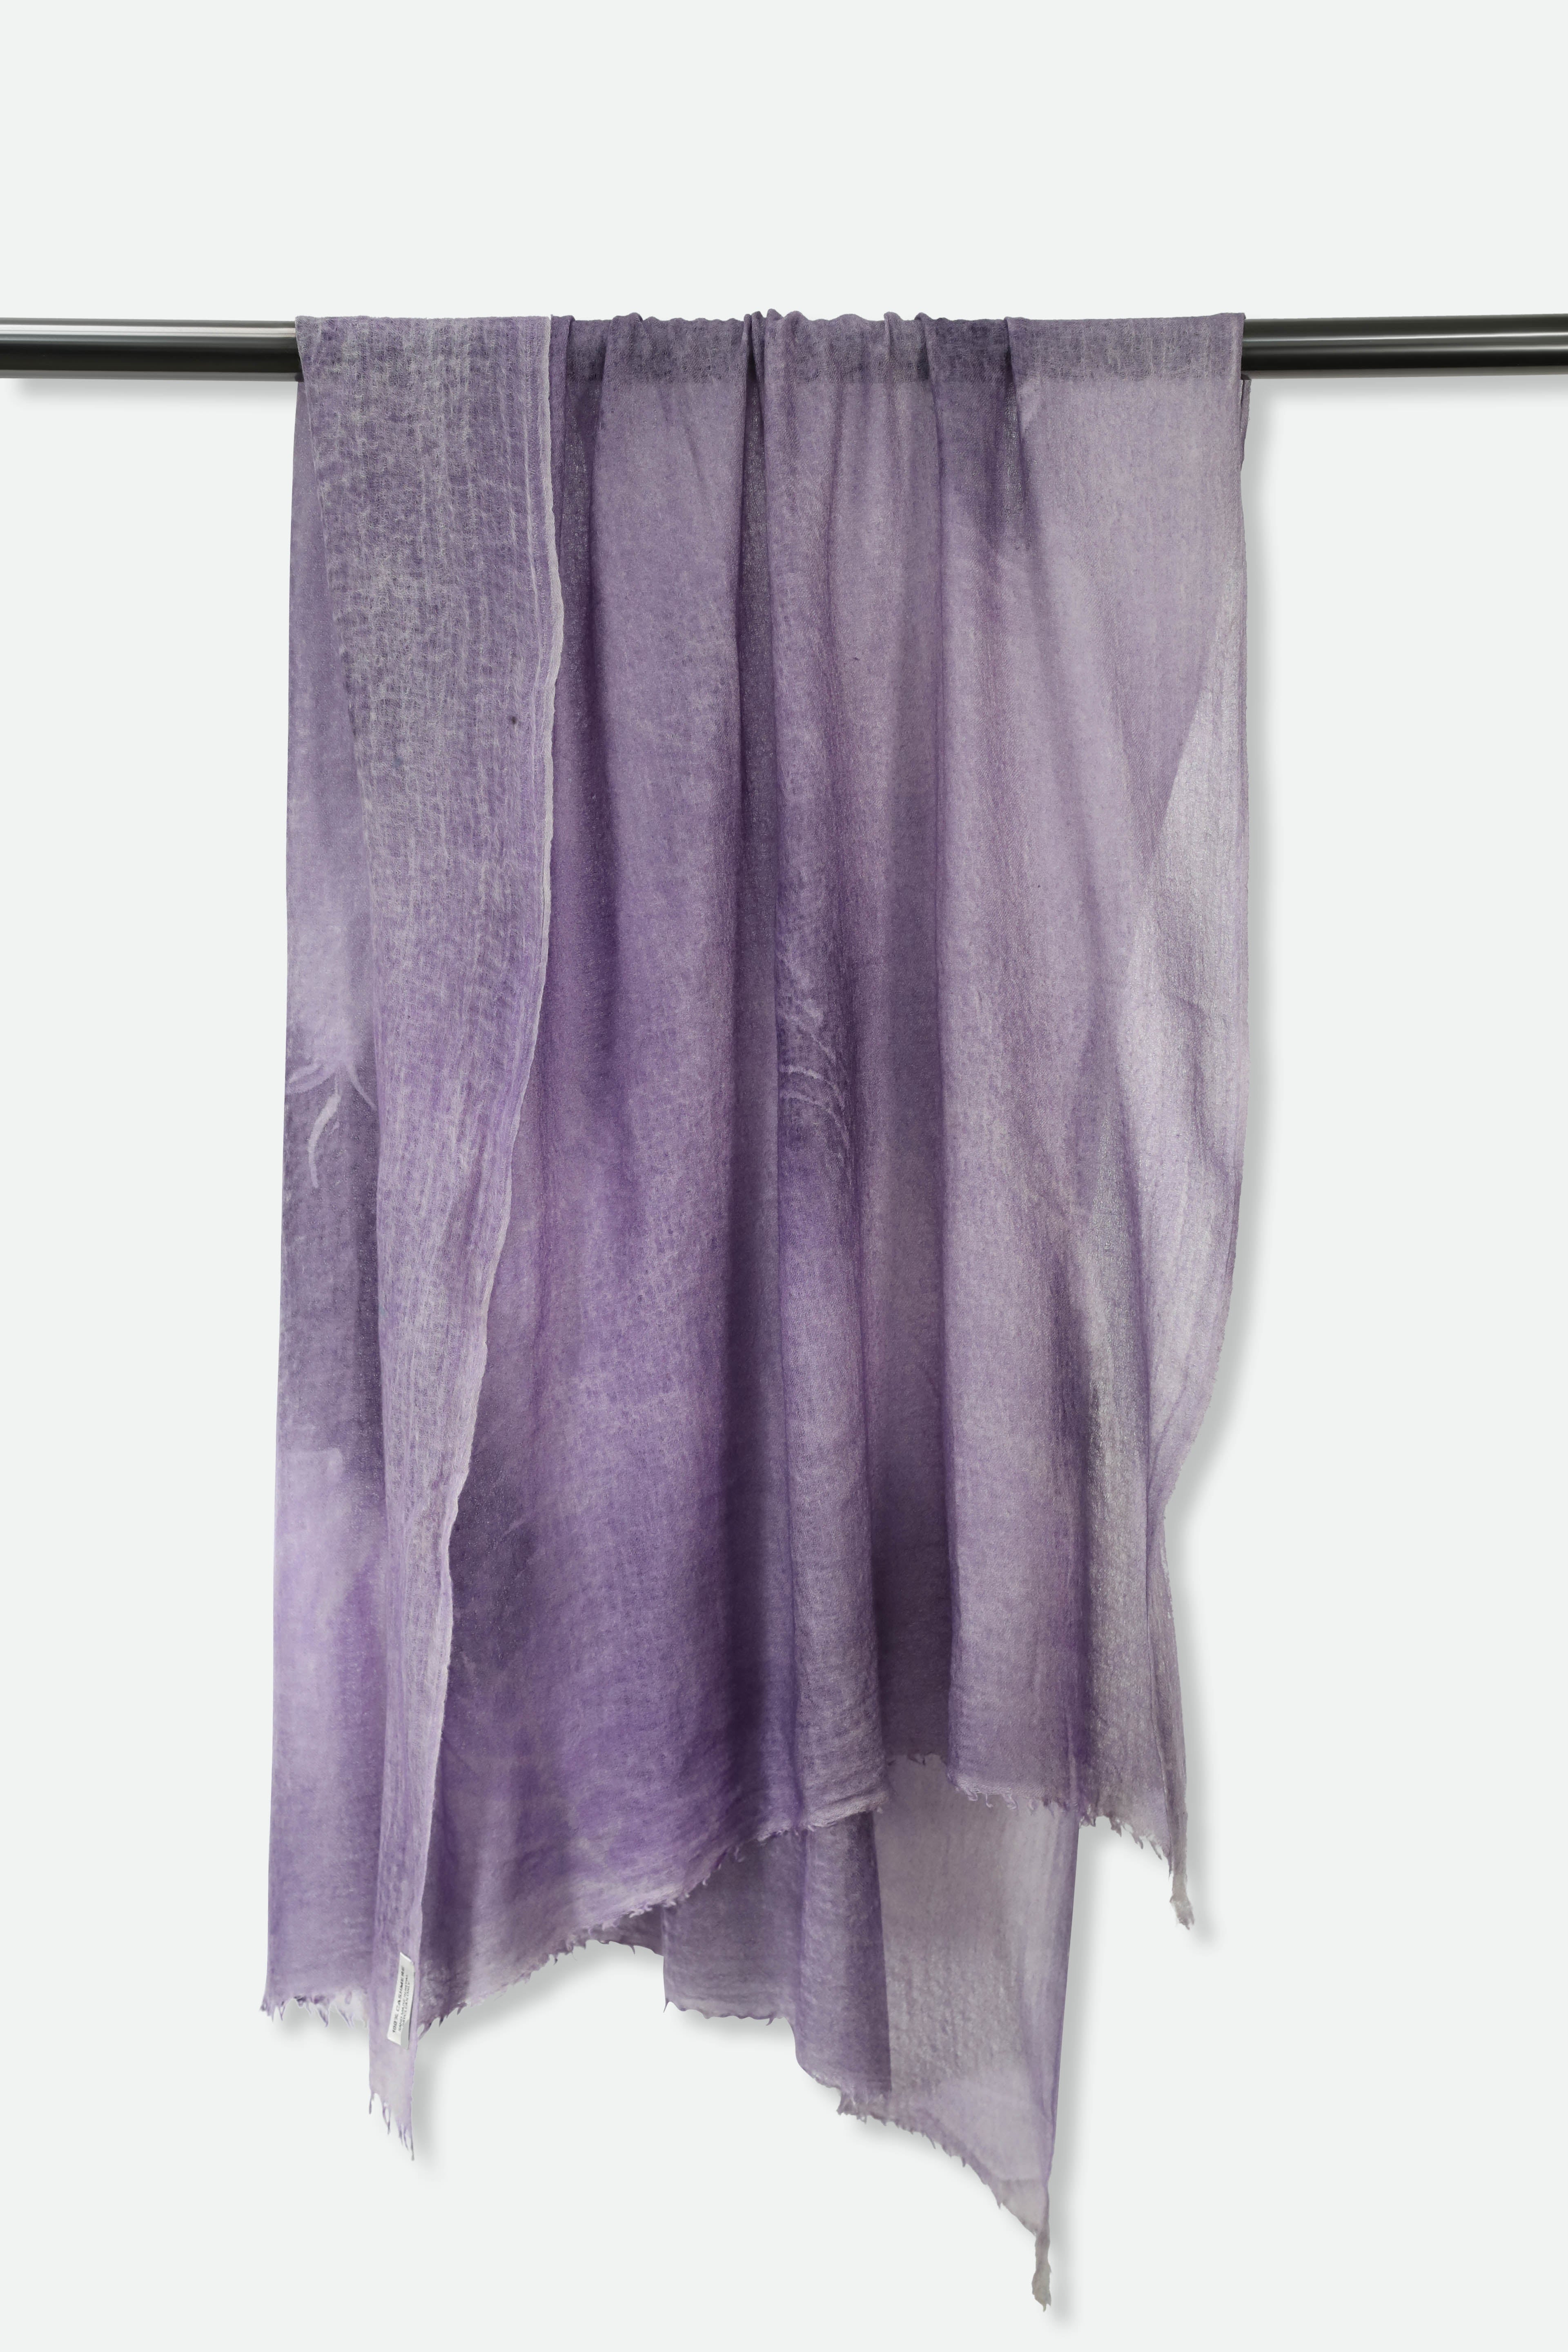 PLUM SCARF IN HAND DYED CASHMERE - Jarbo